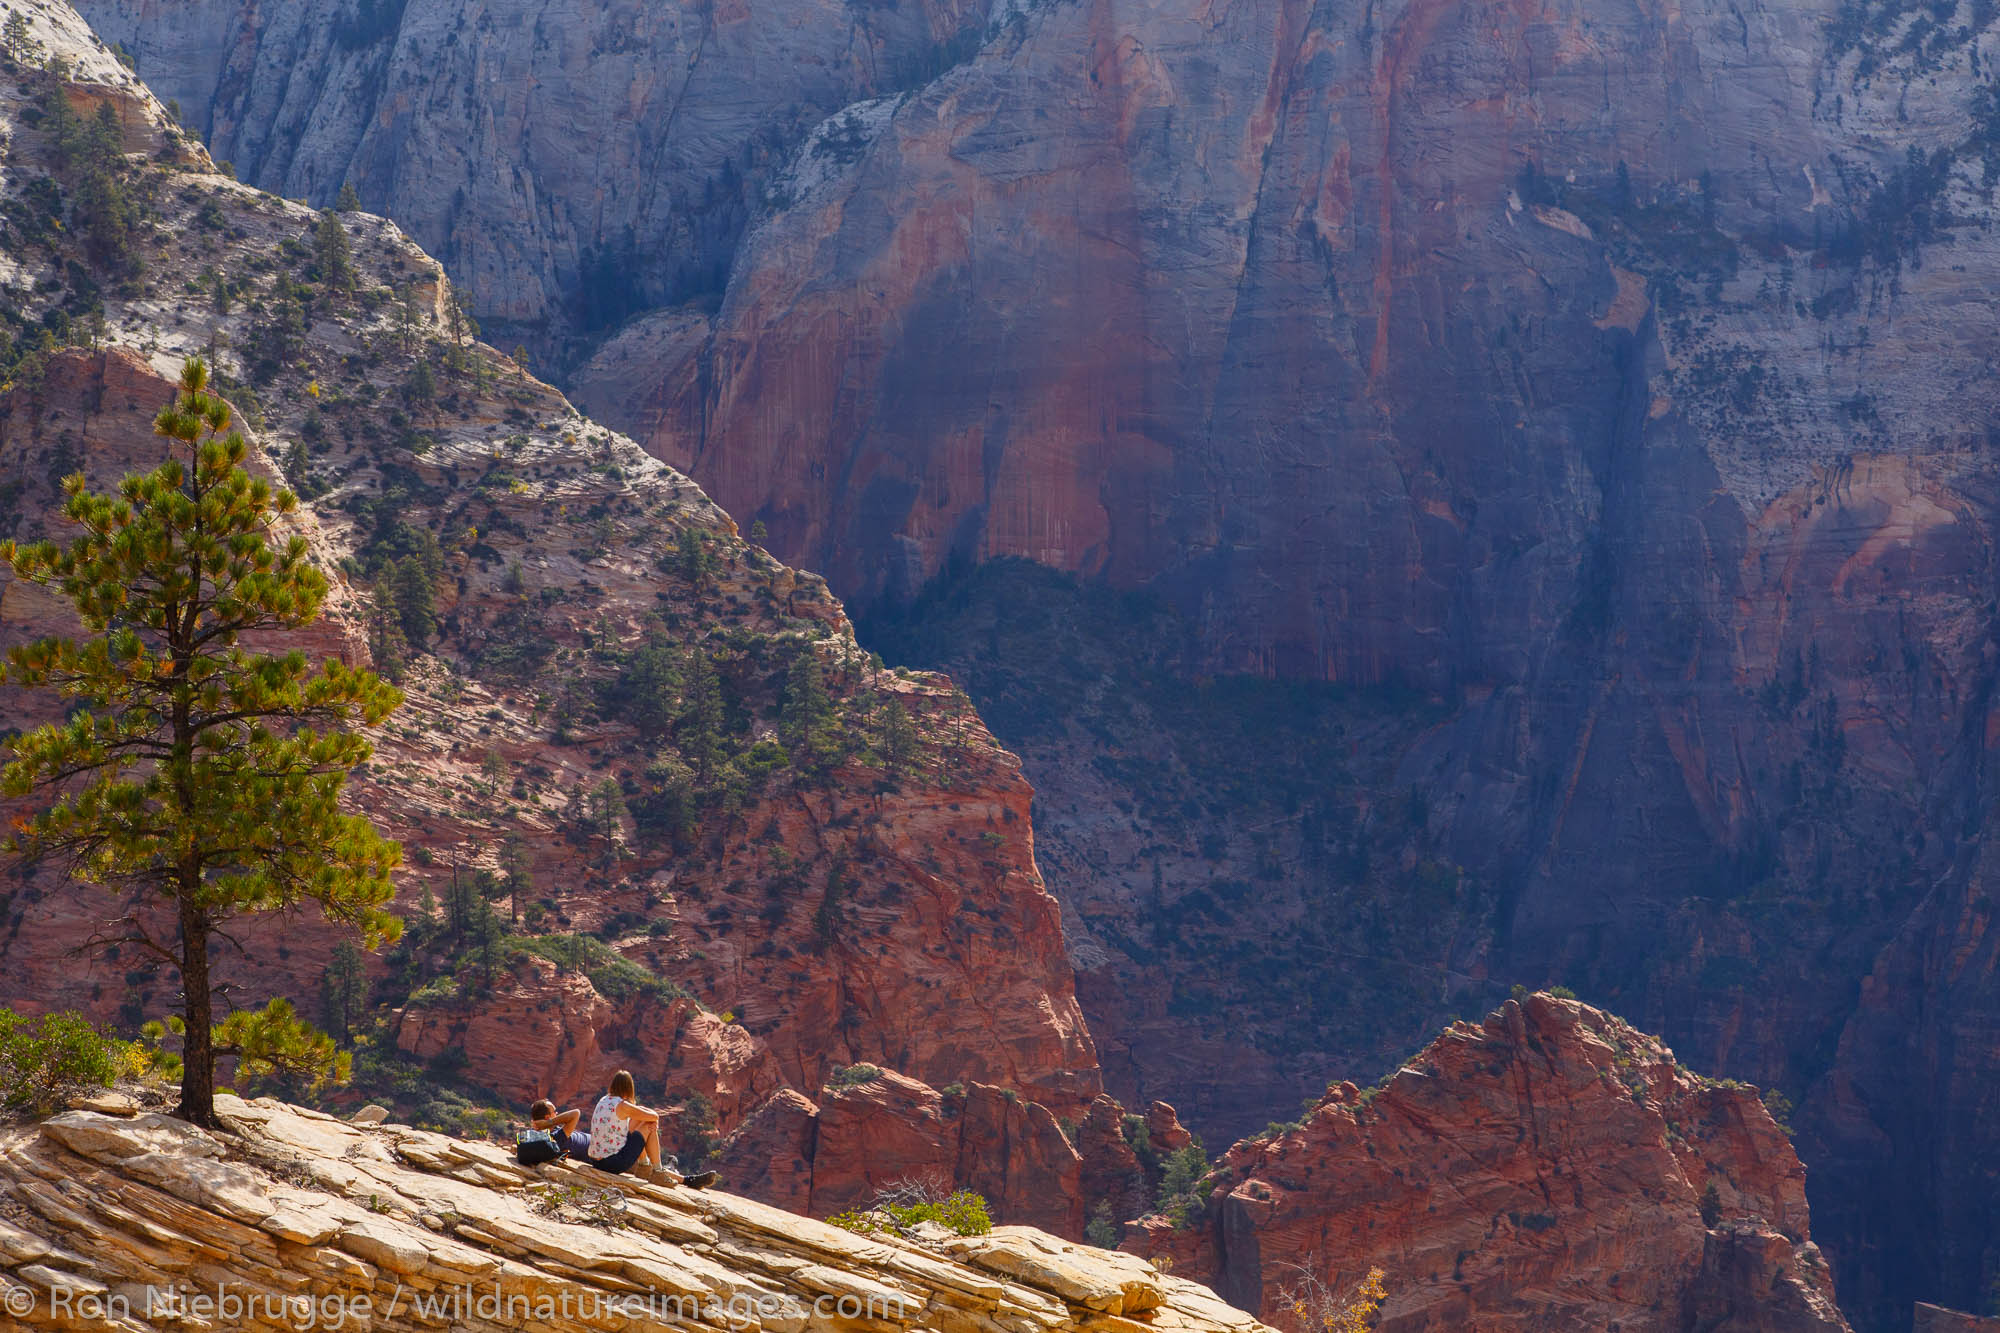 From the West Rim Trail, Zion National Park, Utah.